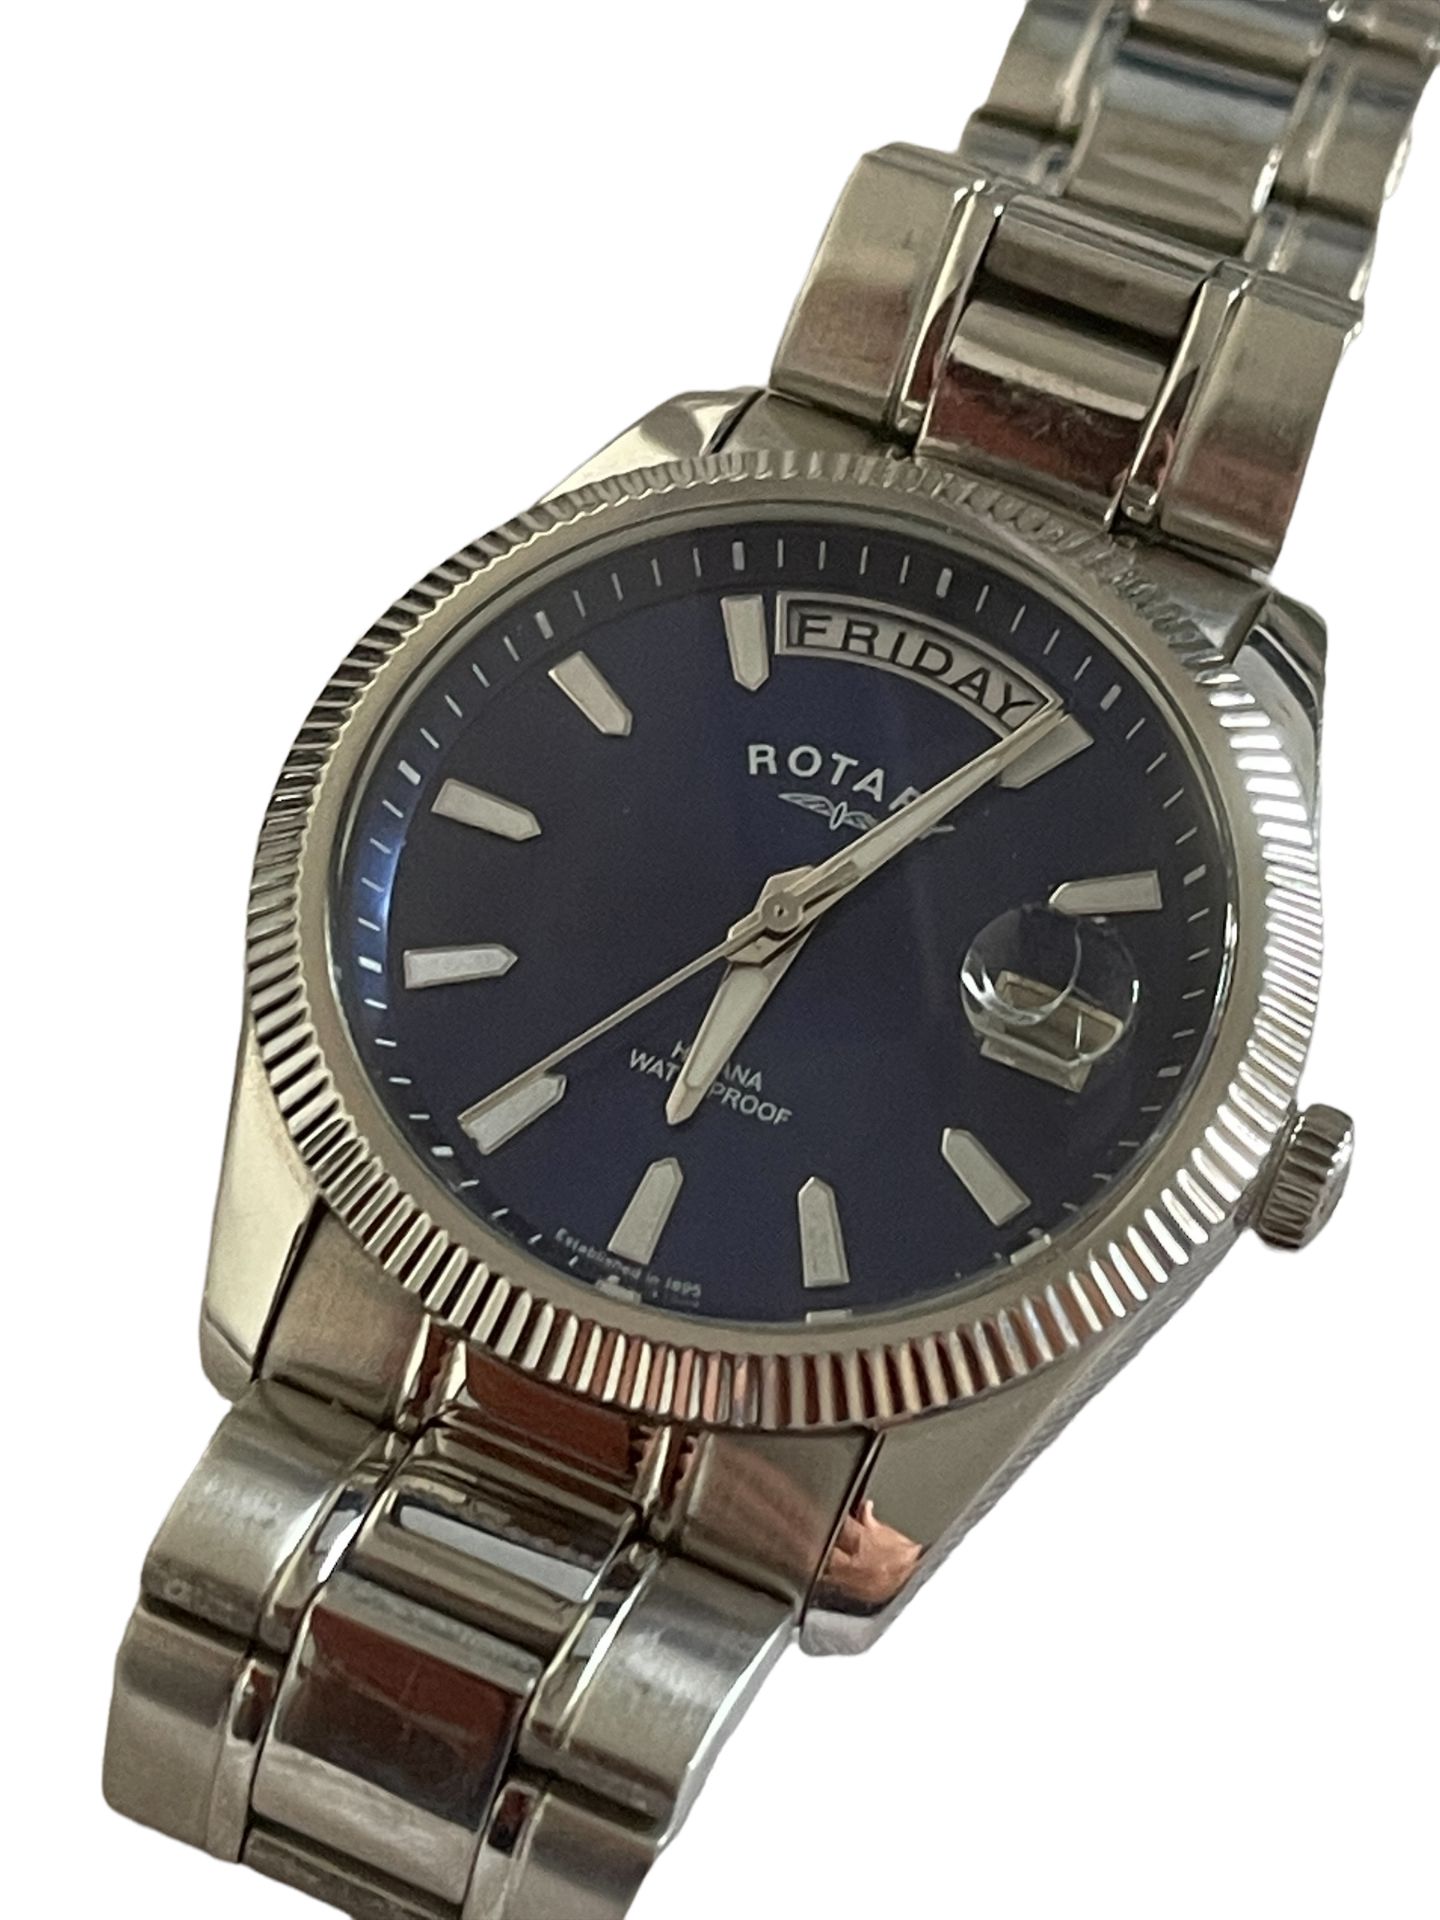 Men's Rotary Havana Watch RRP £199 - Working order - Ex Demo or Return Stock from Private Jet Char..